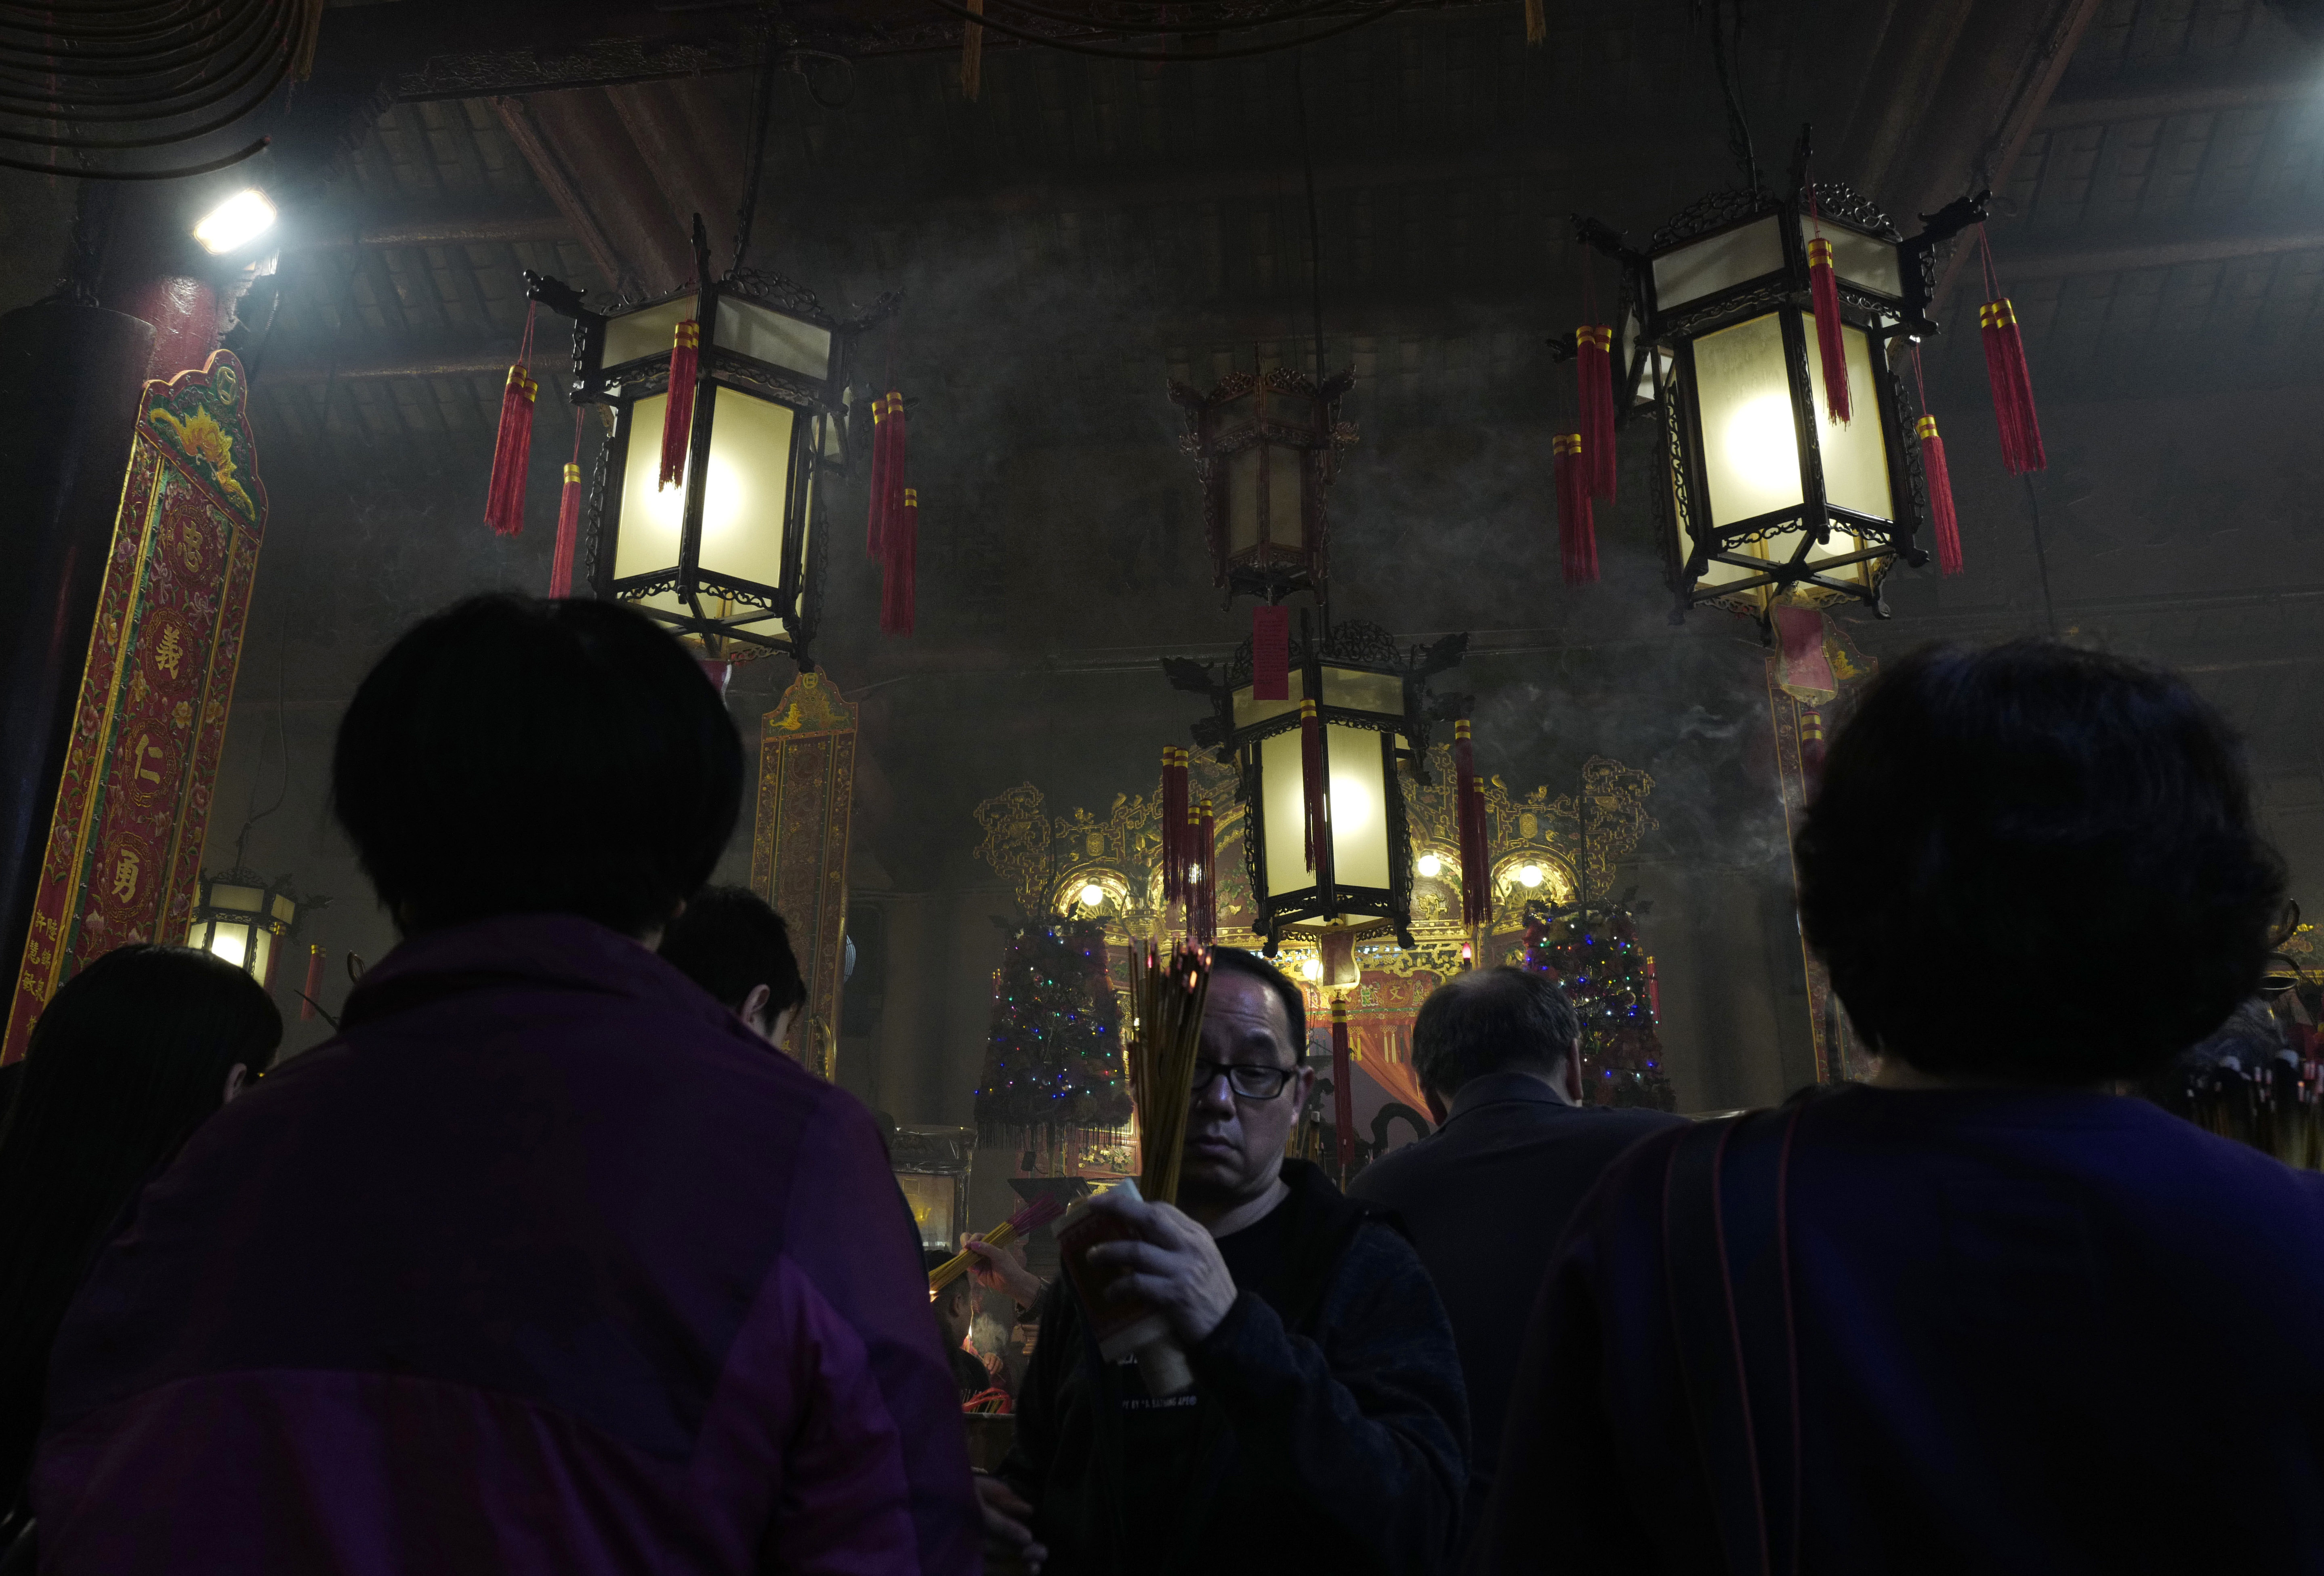 People burn joss sticks as they pray at the Man Mo Miu Temple on the third day of the Lunar New Year in Hong Kong, Monday, Jan. 30, 2017. Chinese are celebrating the Lunar New Year, which marks the Year of the Rooster on the Chinese zodiac. (AP Photo/Vincent Yu)